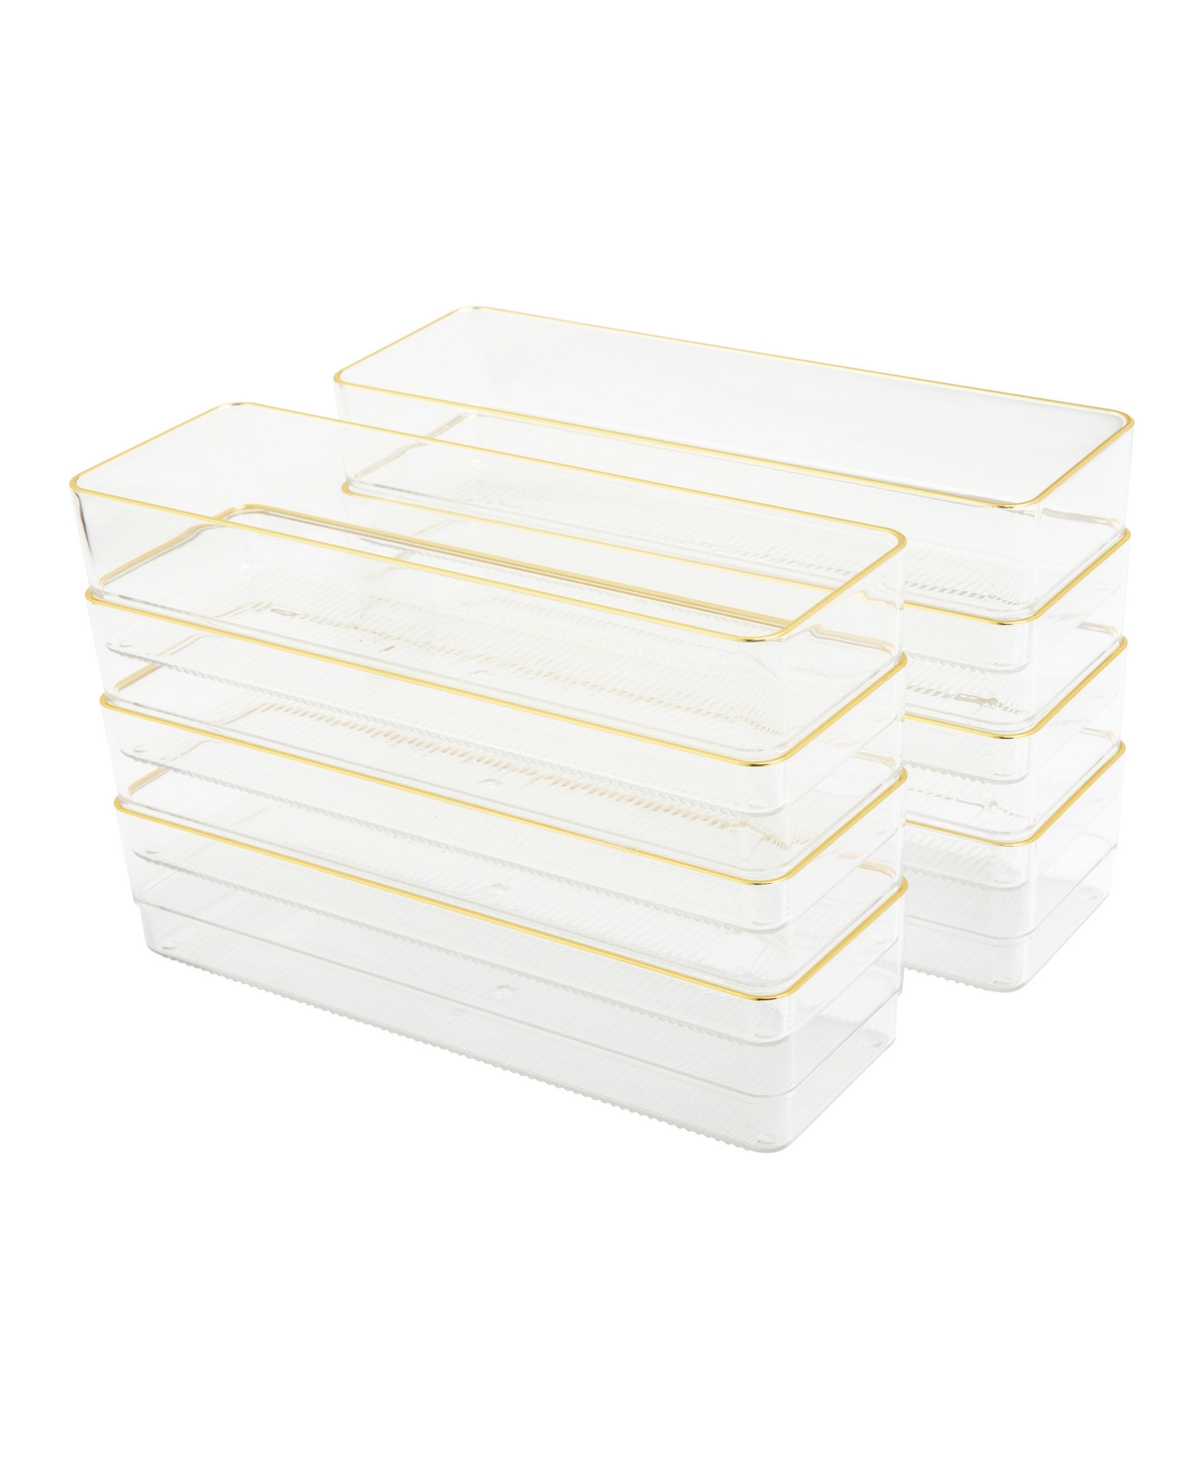 Kerry 8 Piece Plastic Stackable Office Desk Drawer Organizers, 9" x 3" - Clear, Gold Trim